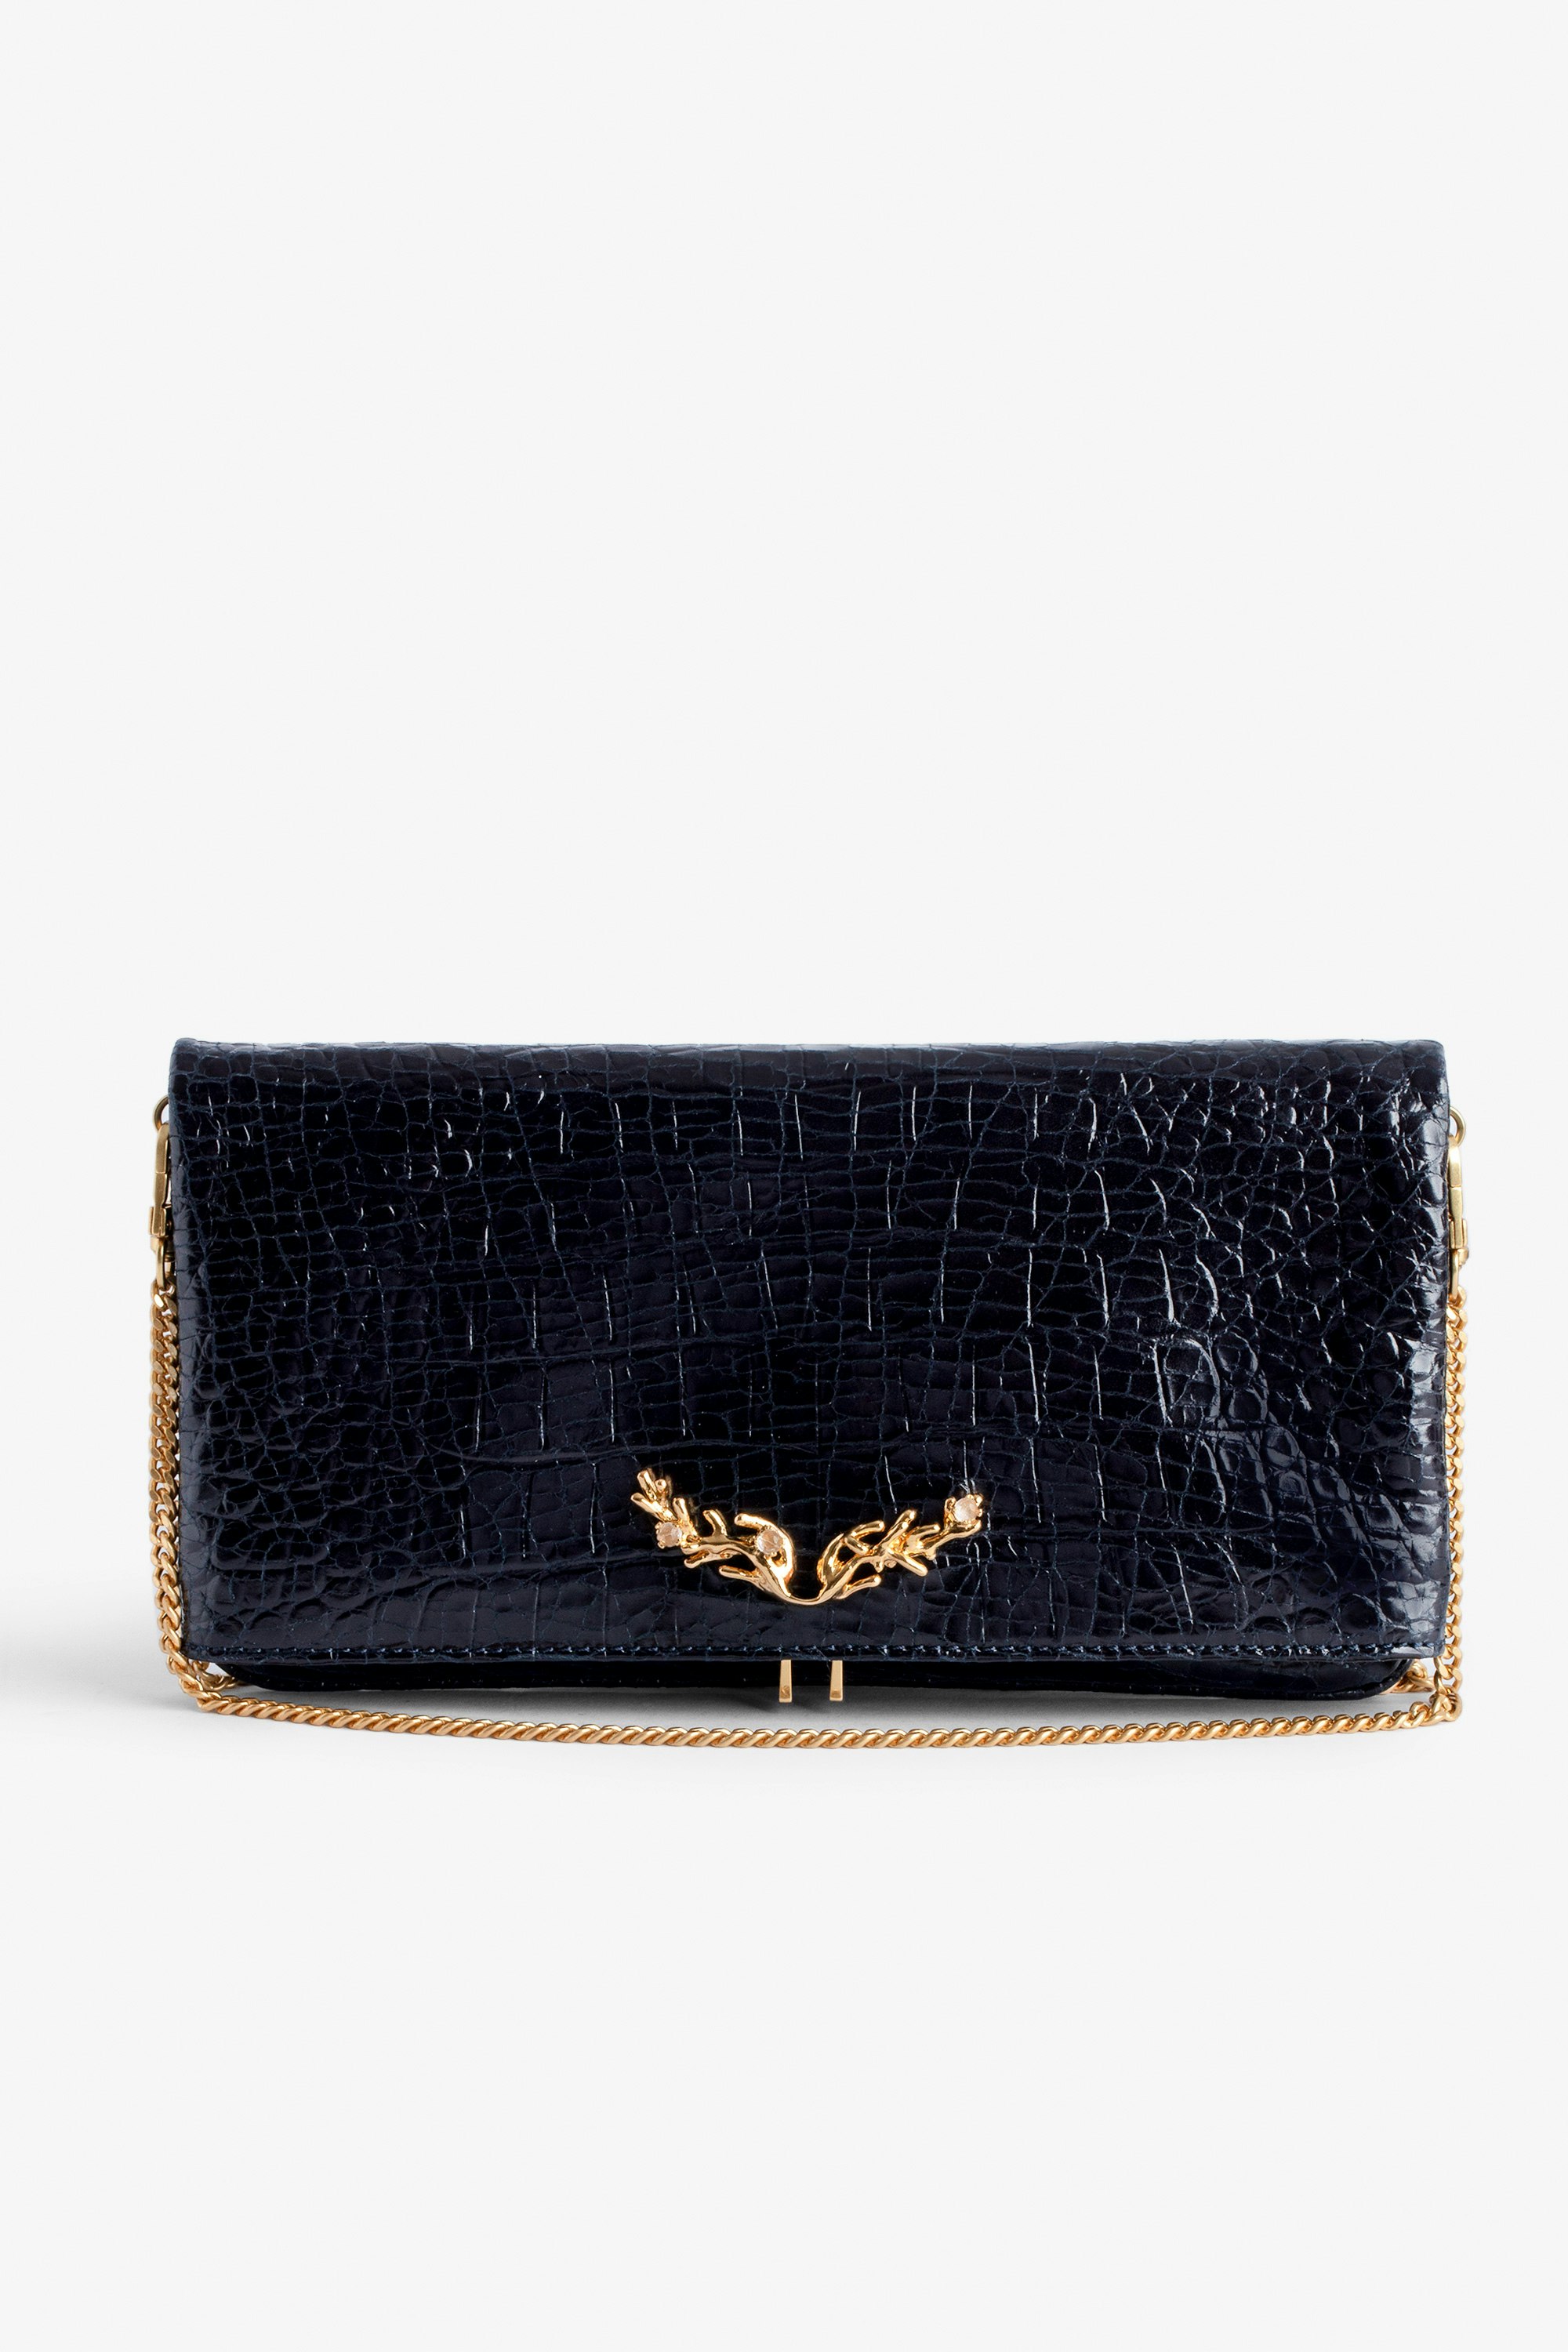 Rock Embossed Clutch - Rock navy blue croc-embossed leather clutch with Goossens gold-tone metal chain.